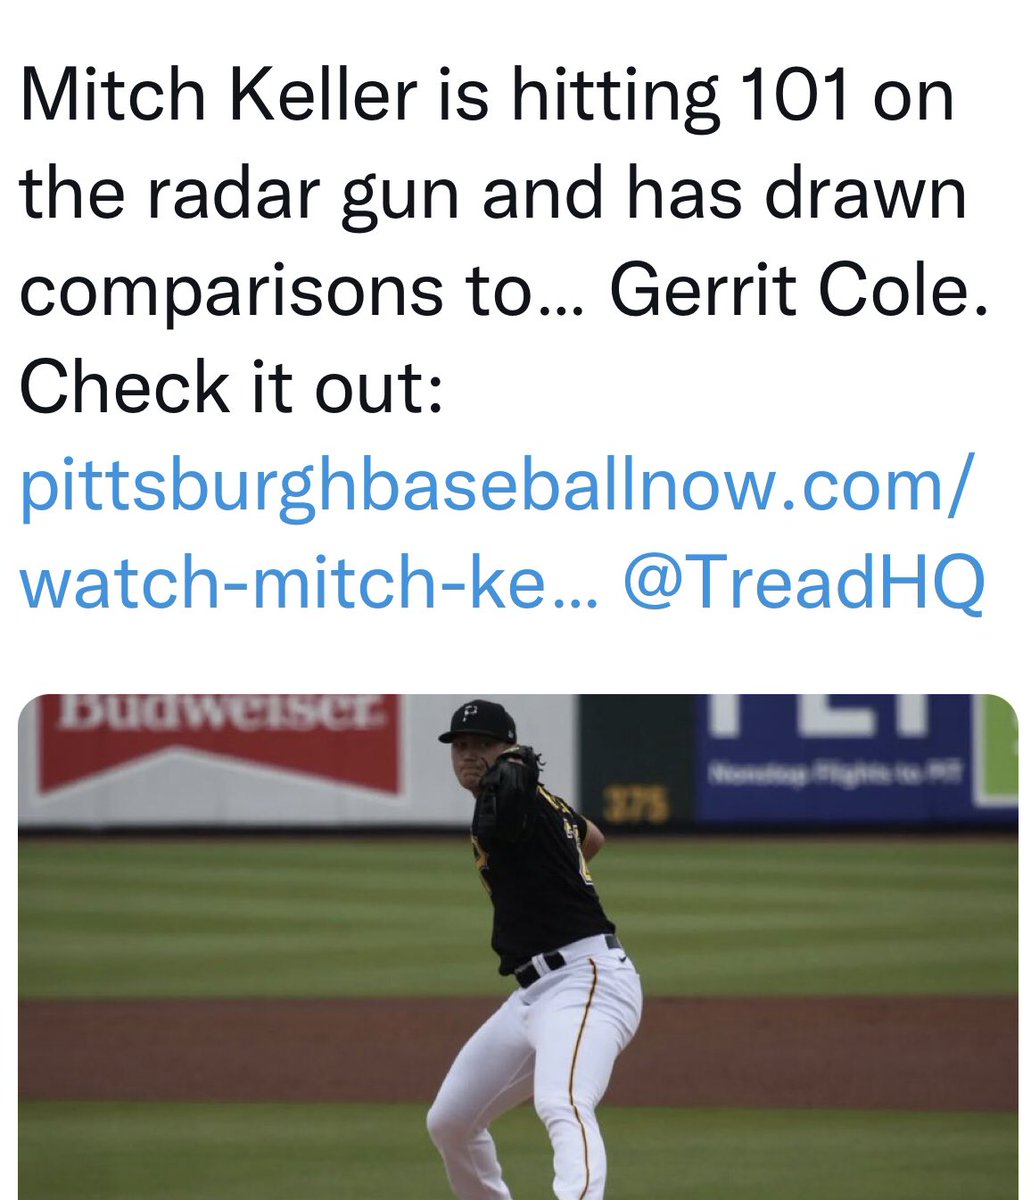 I’ve heard it all, this off-season. O’Neil Cruz is Aaron Judge and Now Mitch Keller is Gerrit Cole. WTF Pirates Twitter? https://t.co/OvOOwYihRj